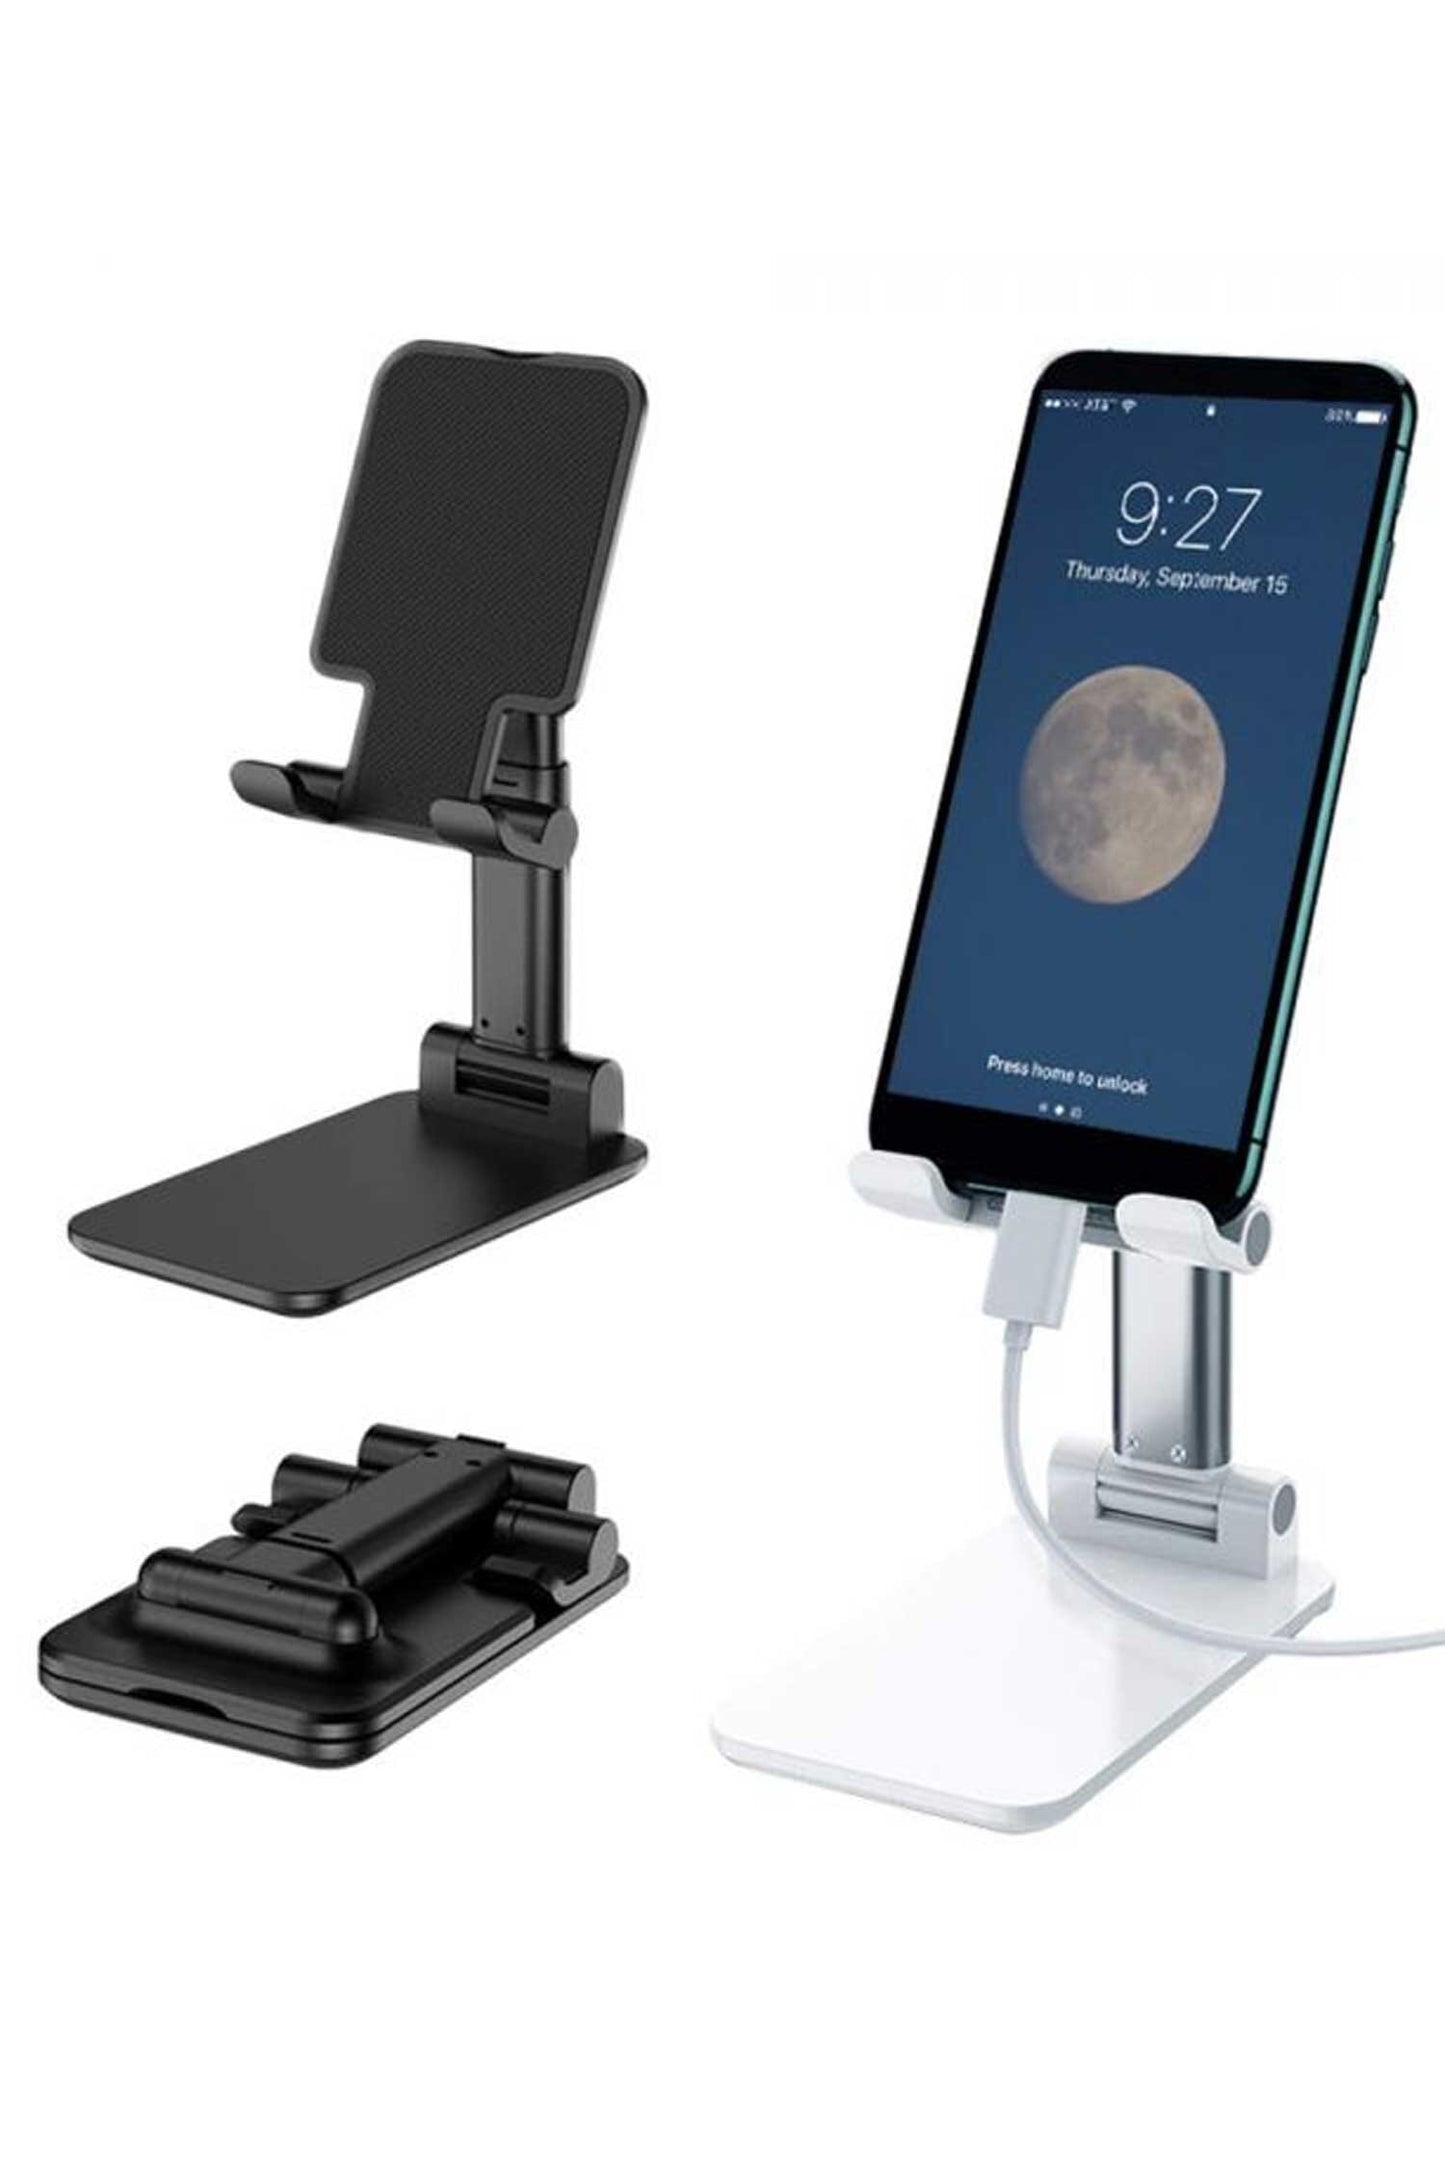 Toowoomba Folding Desktop Phone Stand Mobile Accessories SDQ 